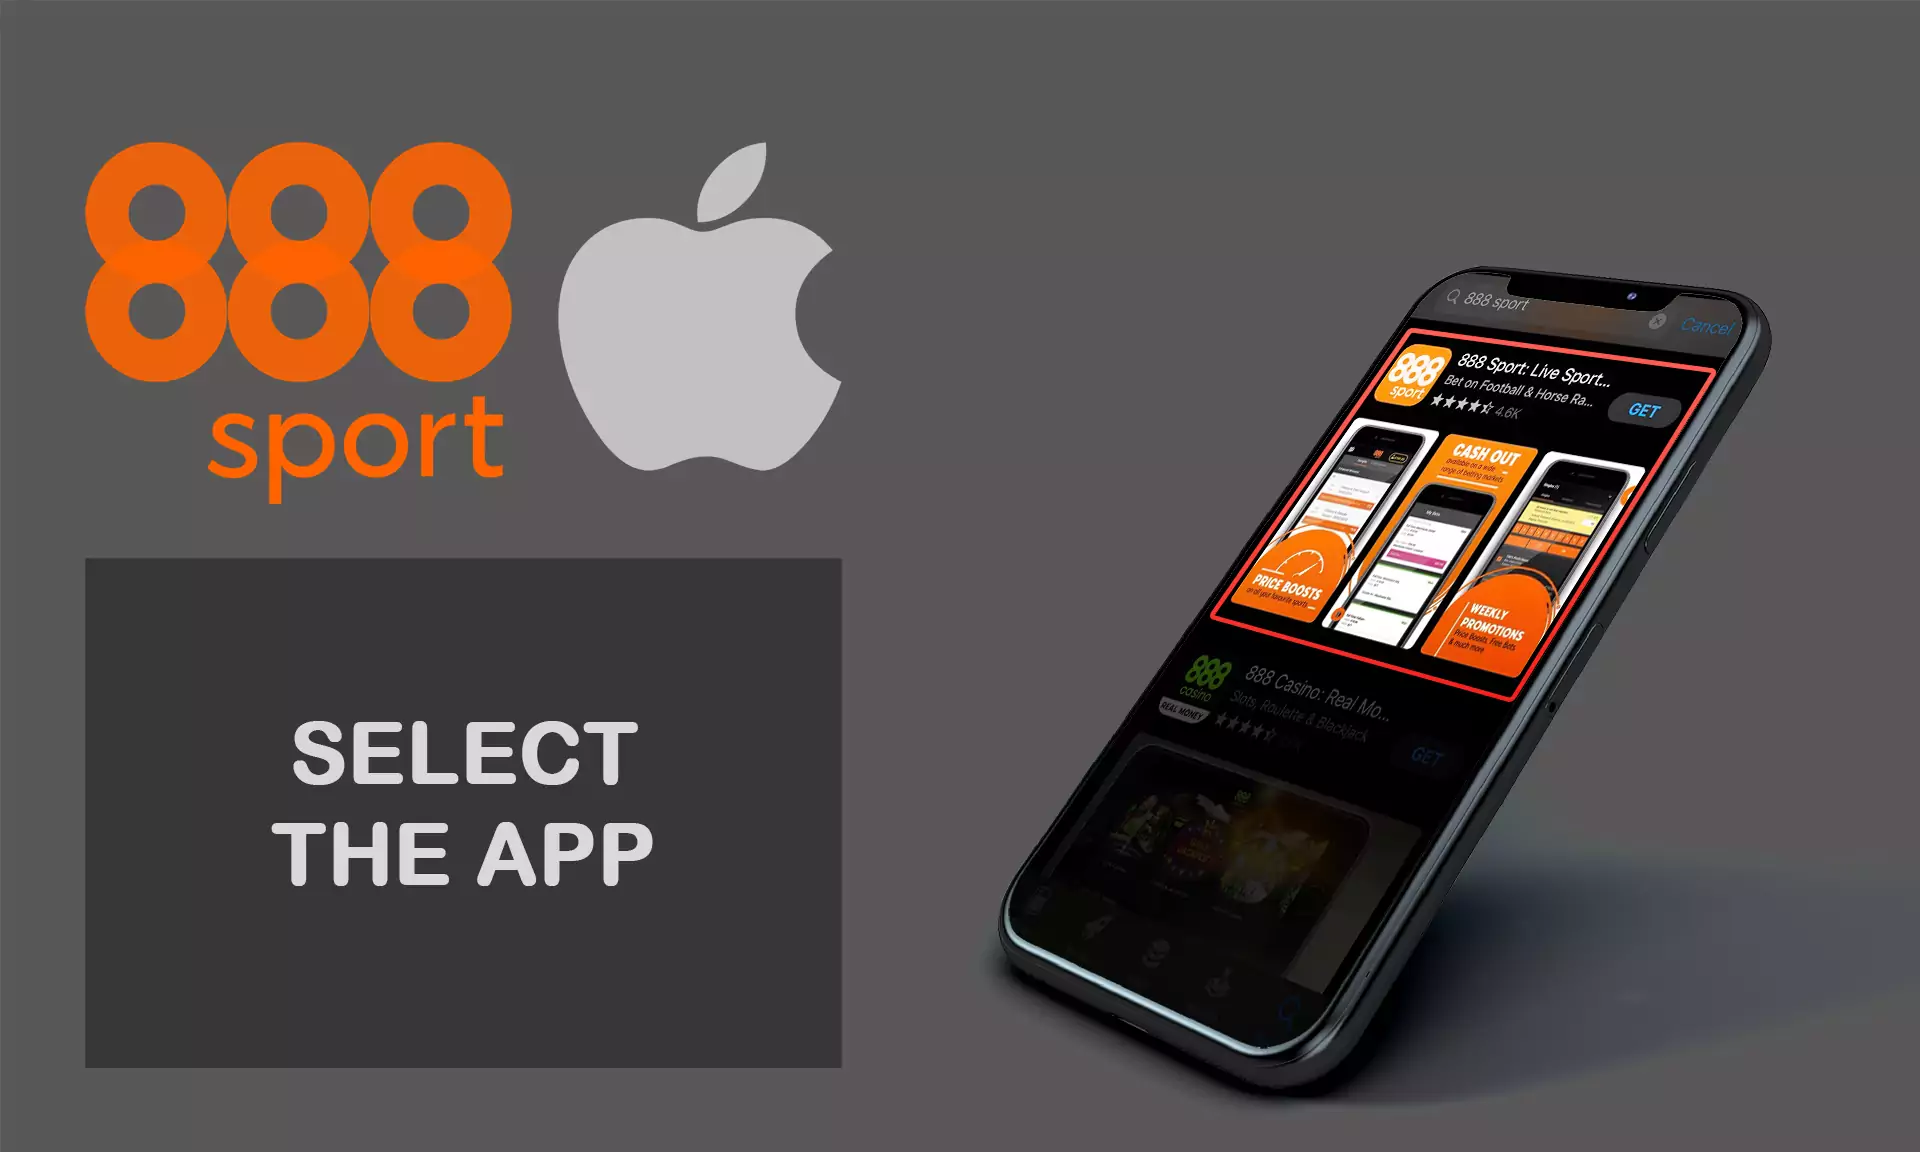 Select the right app from the list.